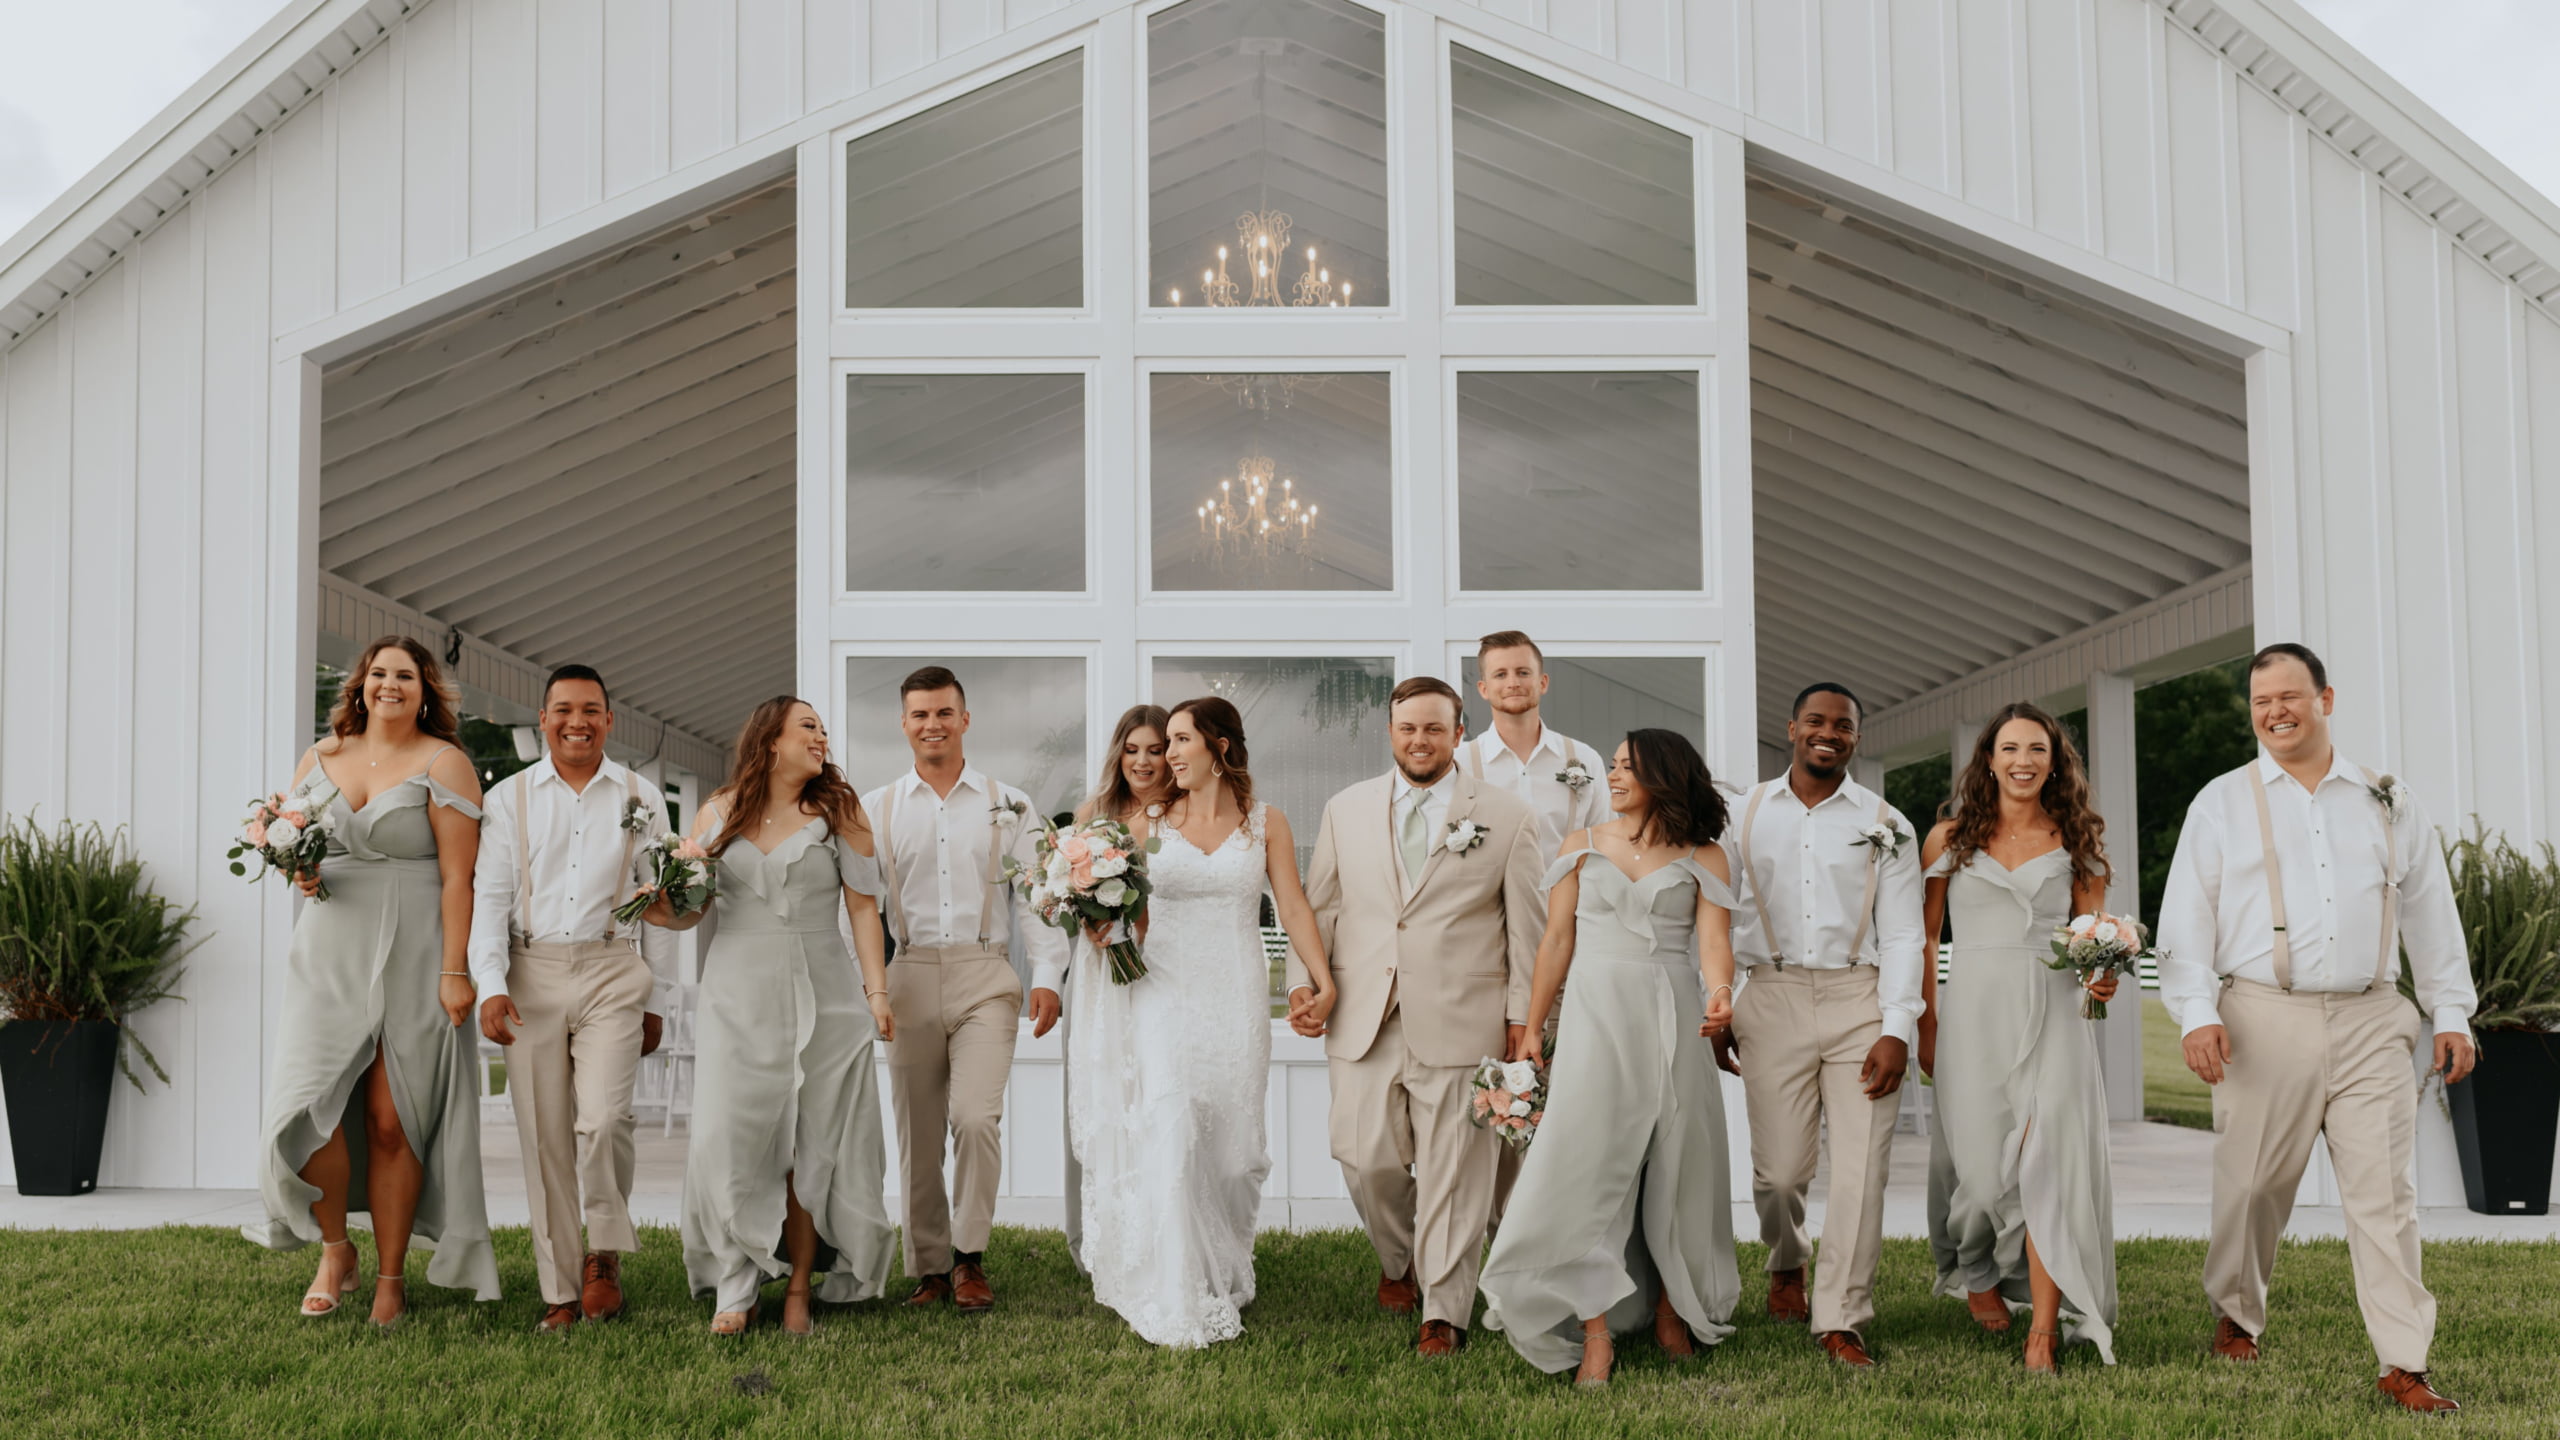 Lakeview Hills outdoor wedding venues in Oklahoma